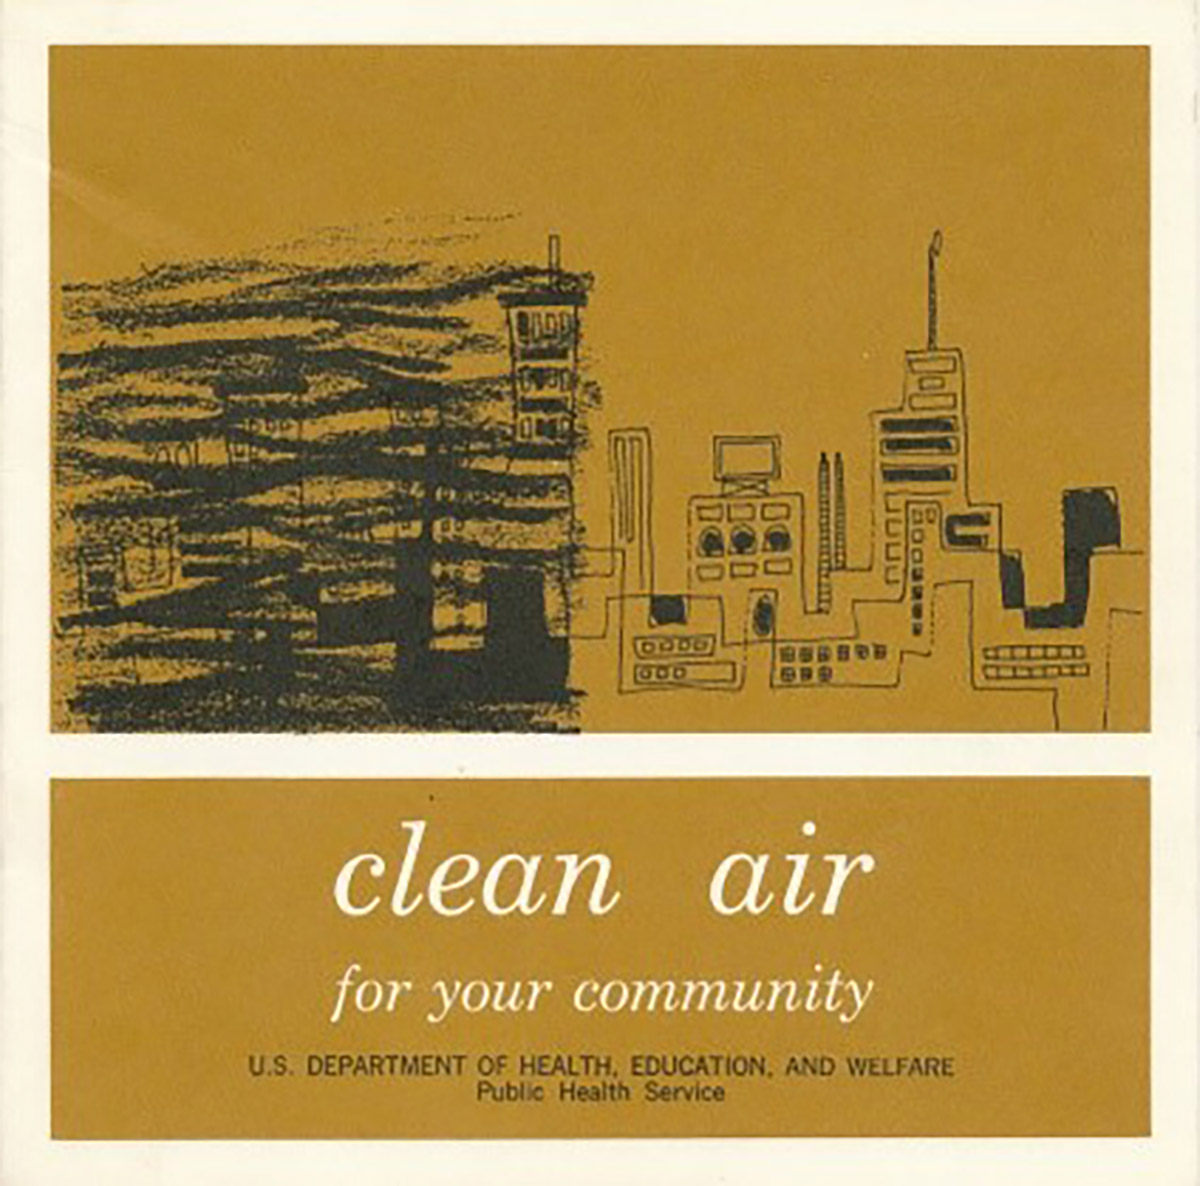 A book cover with an illustration of a city skyline partially covered in smog.